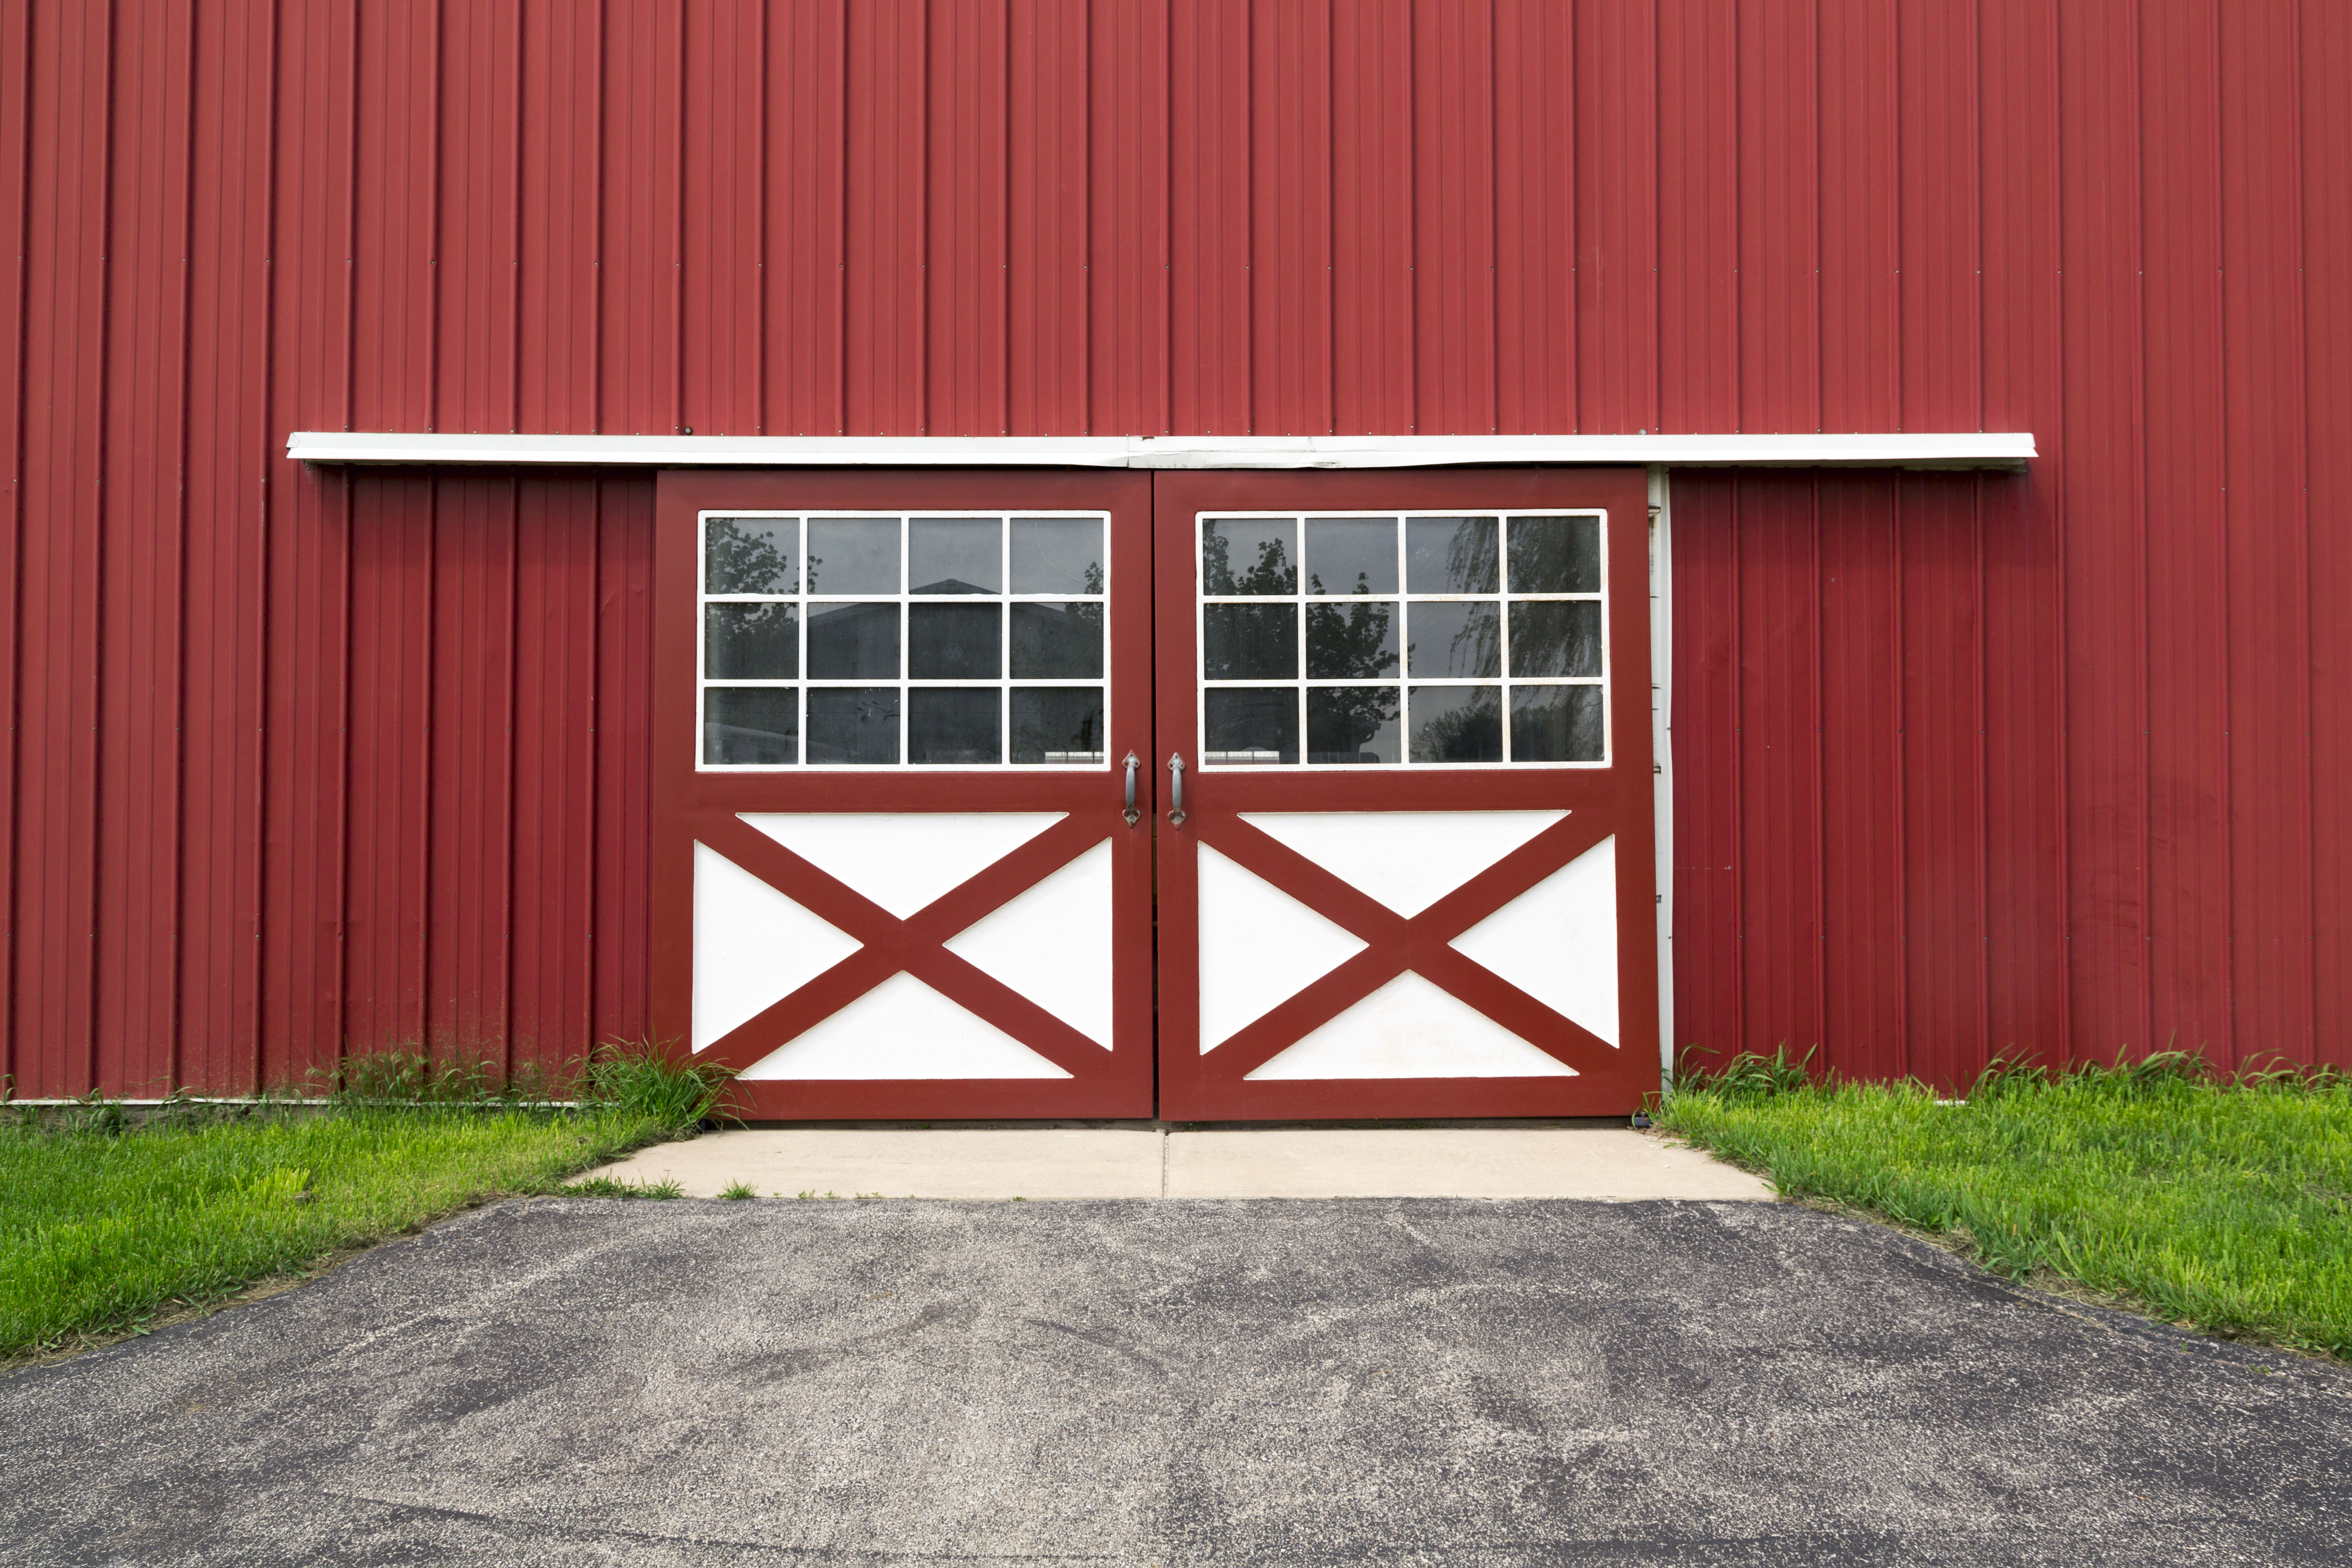 The 5 Advantages of Prefabricated Metal Feed Storage Barns